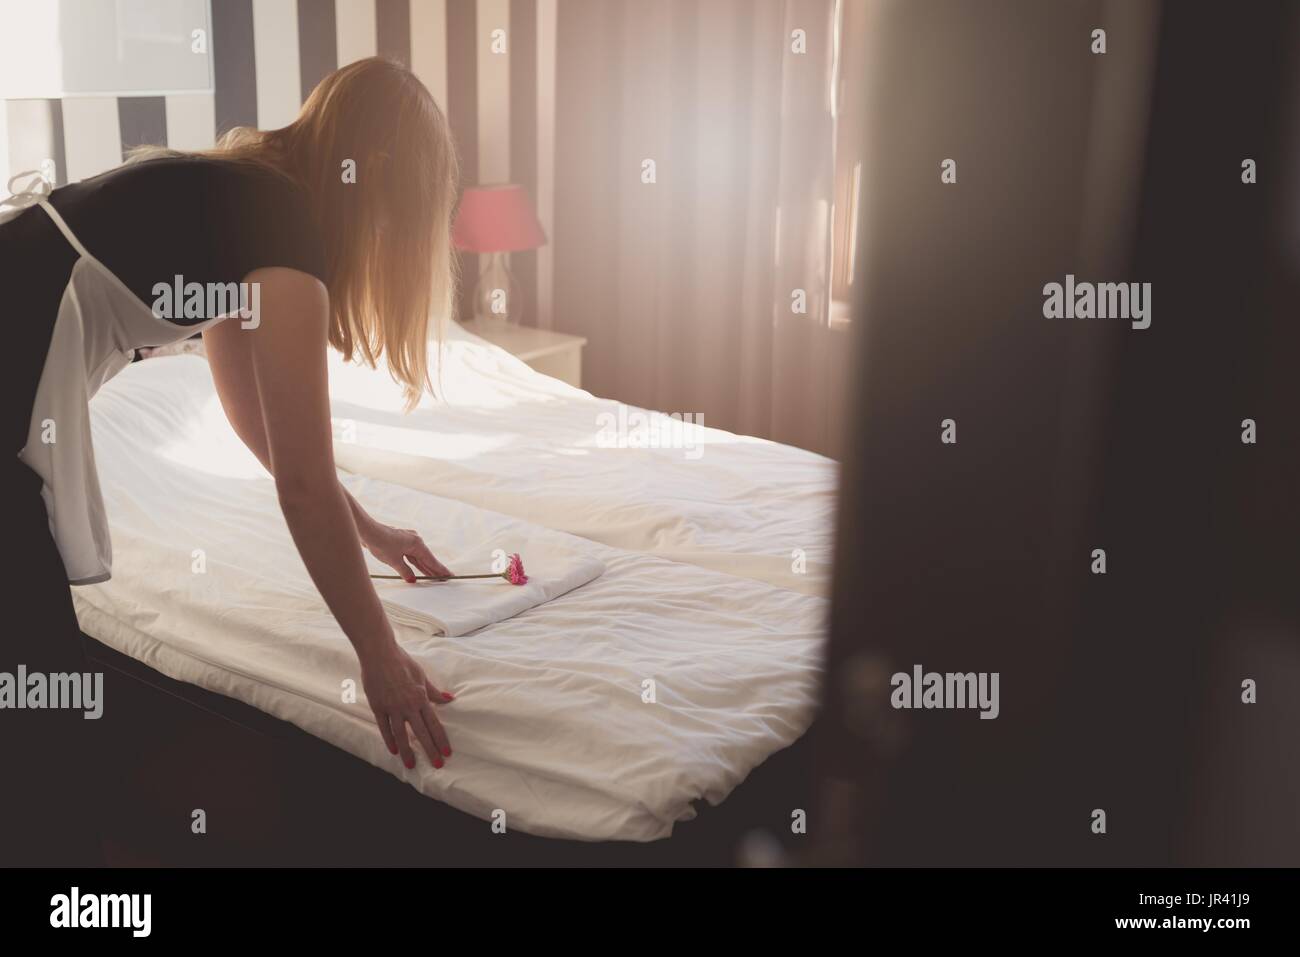 Hotel maid doing room service. She is making up the beds. Stock Photo